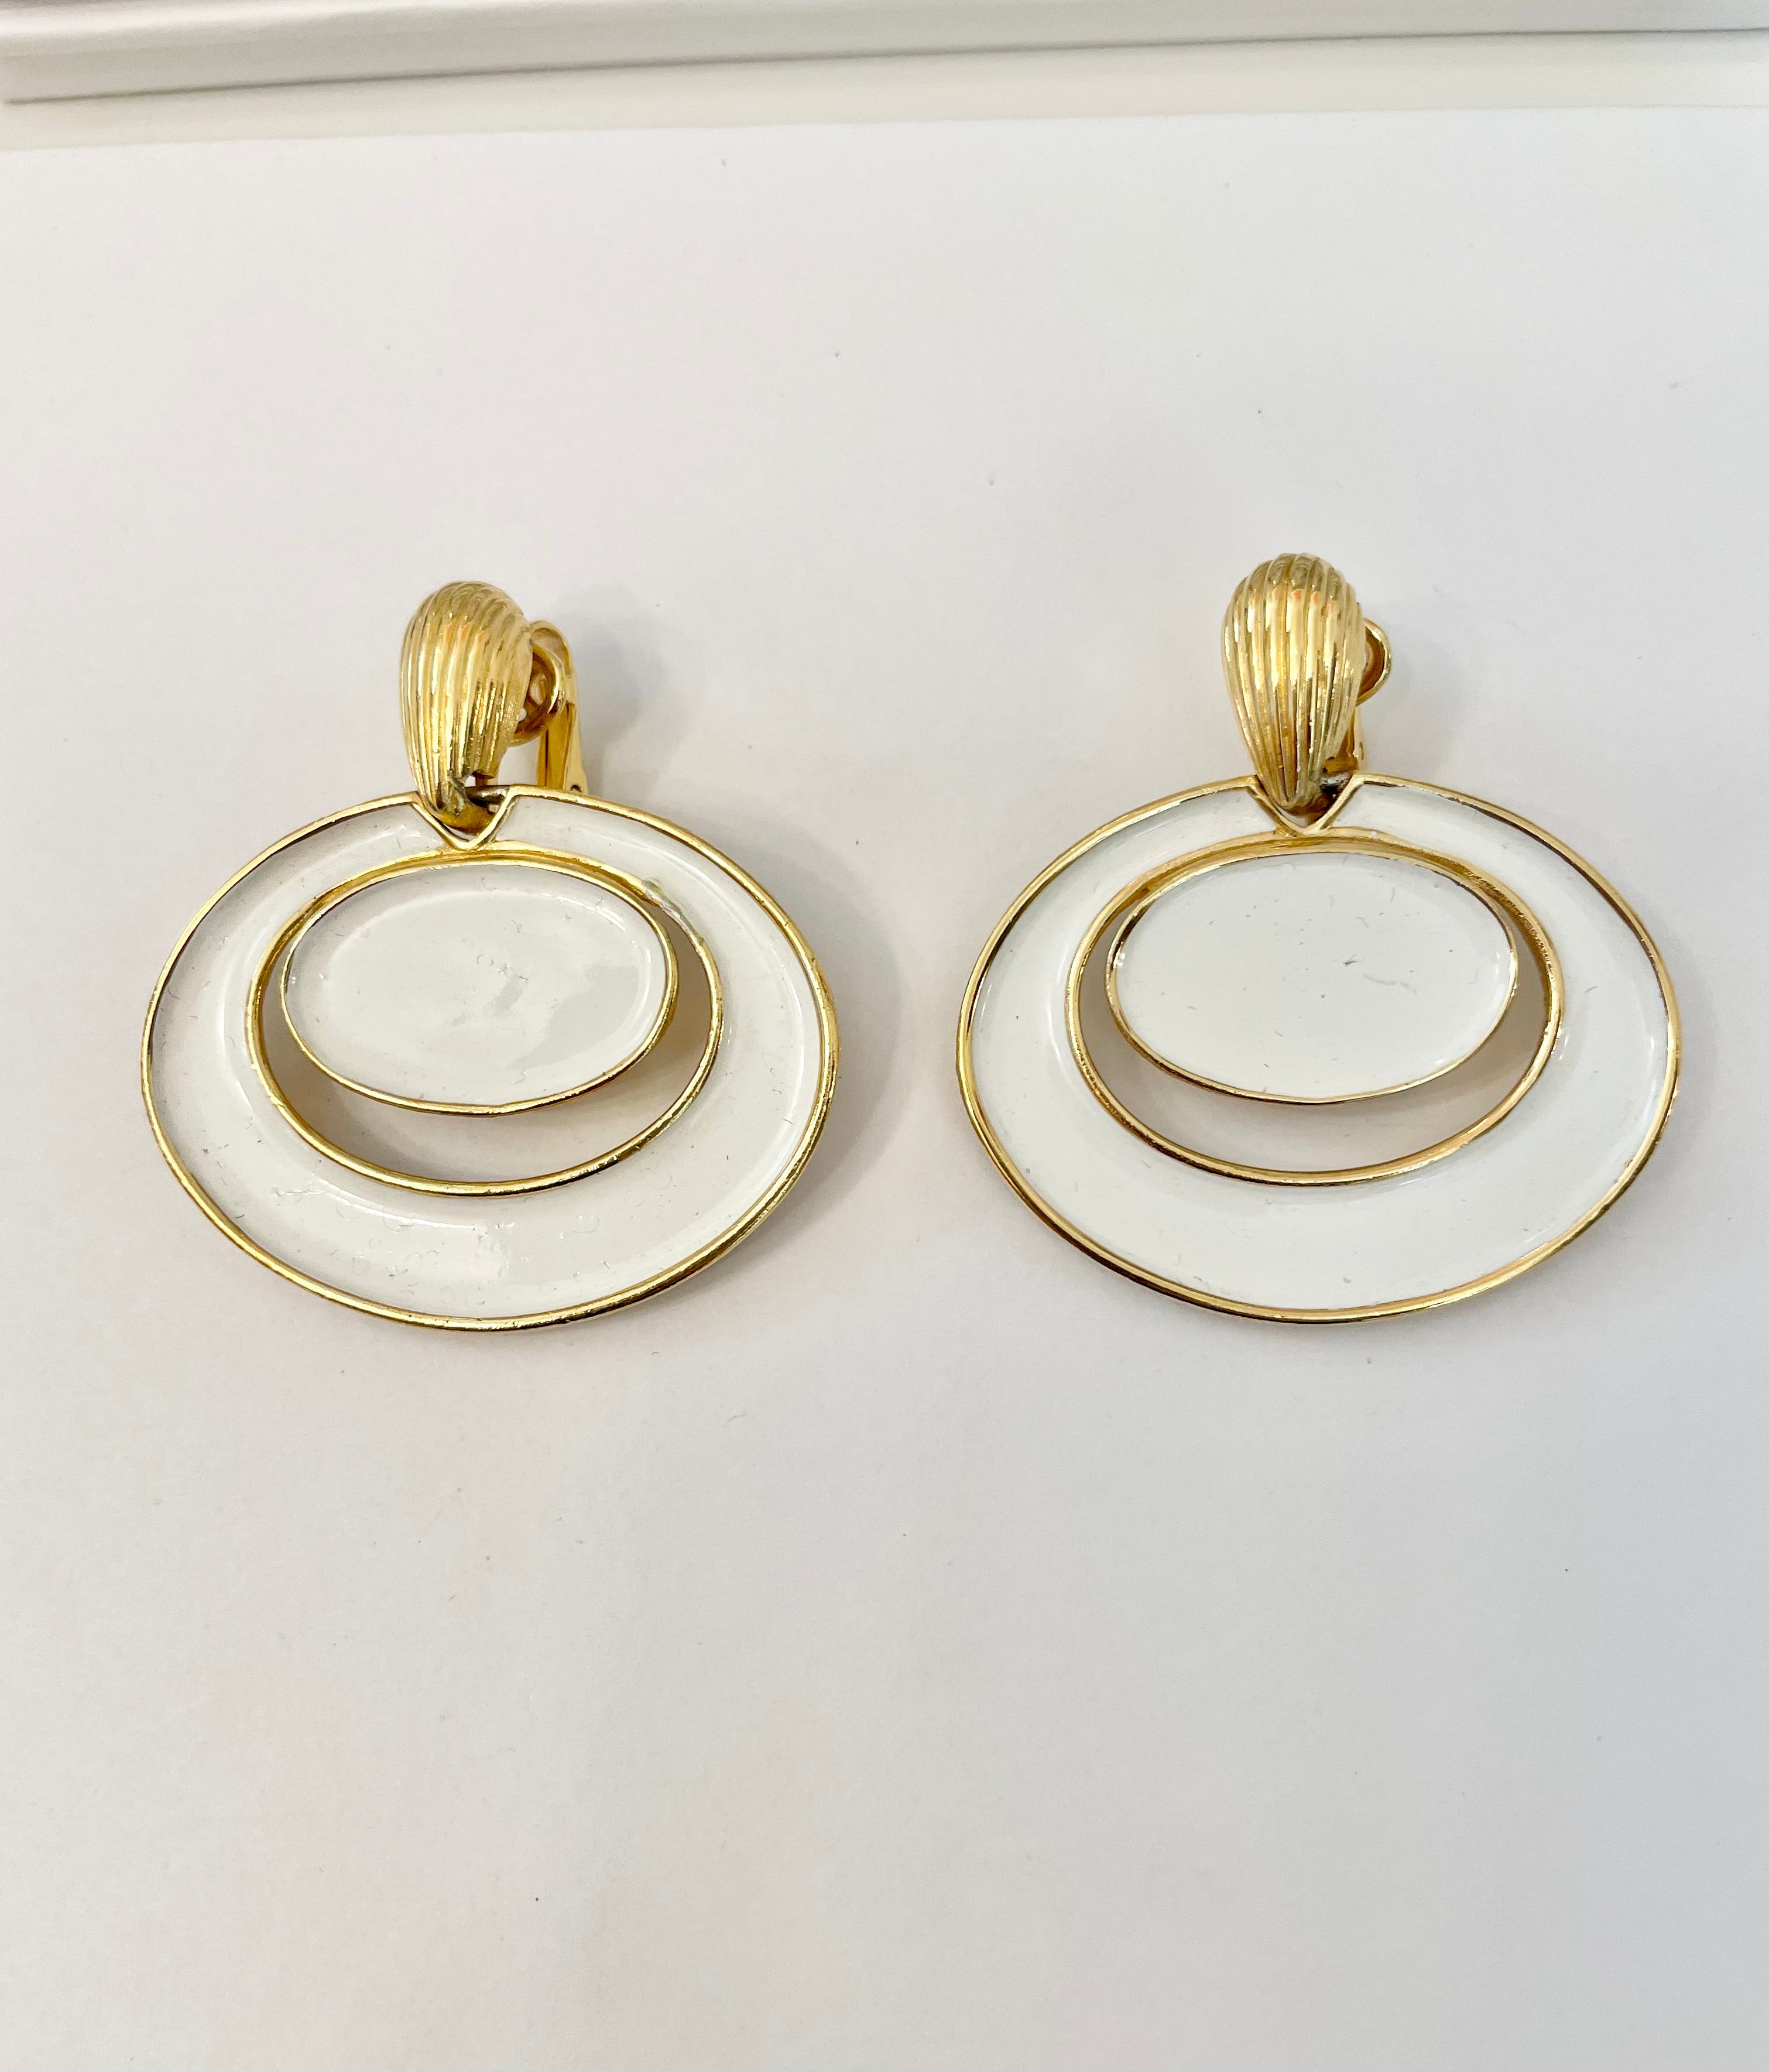 Truly lovely 1970's Trifari ivory, and gold modern clip earrings...so timeless